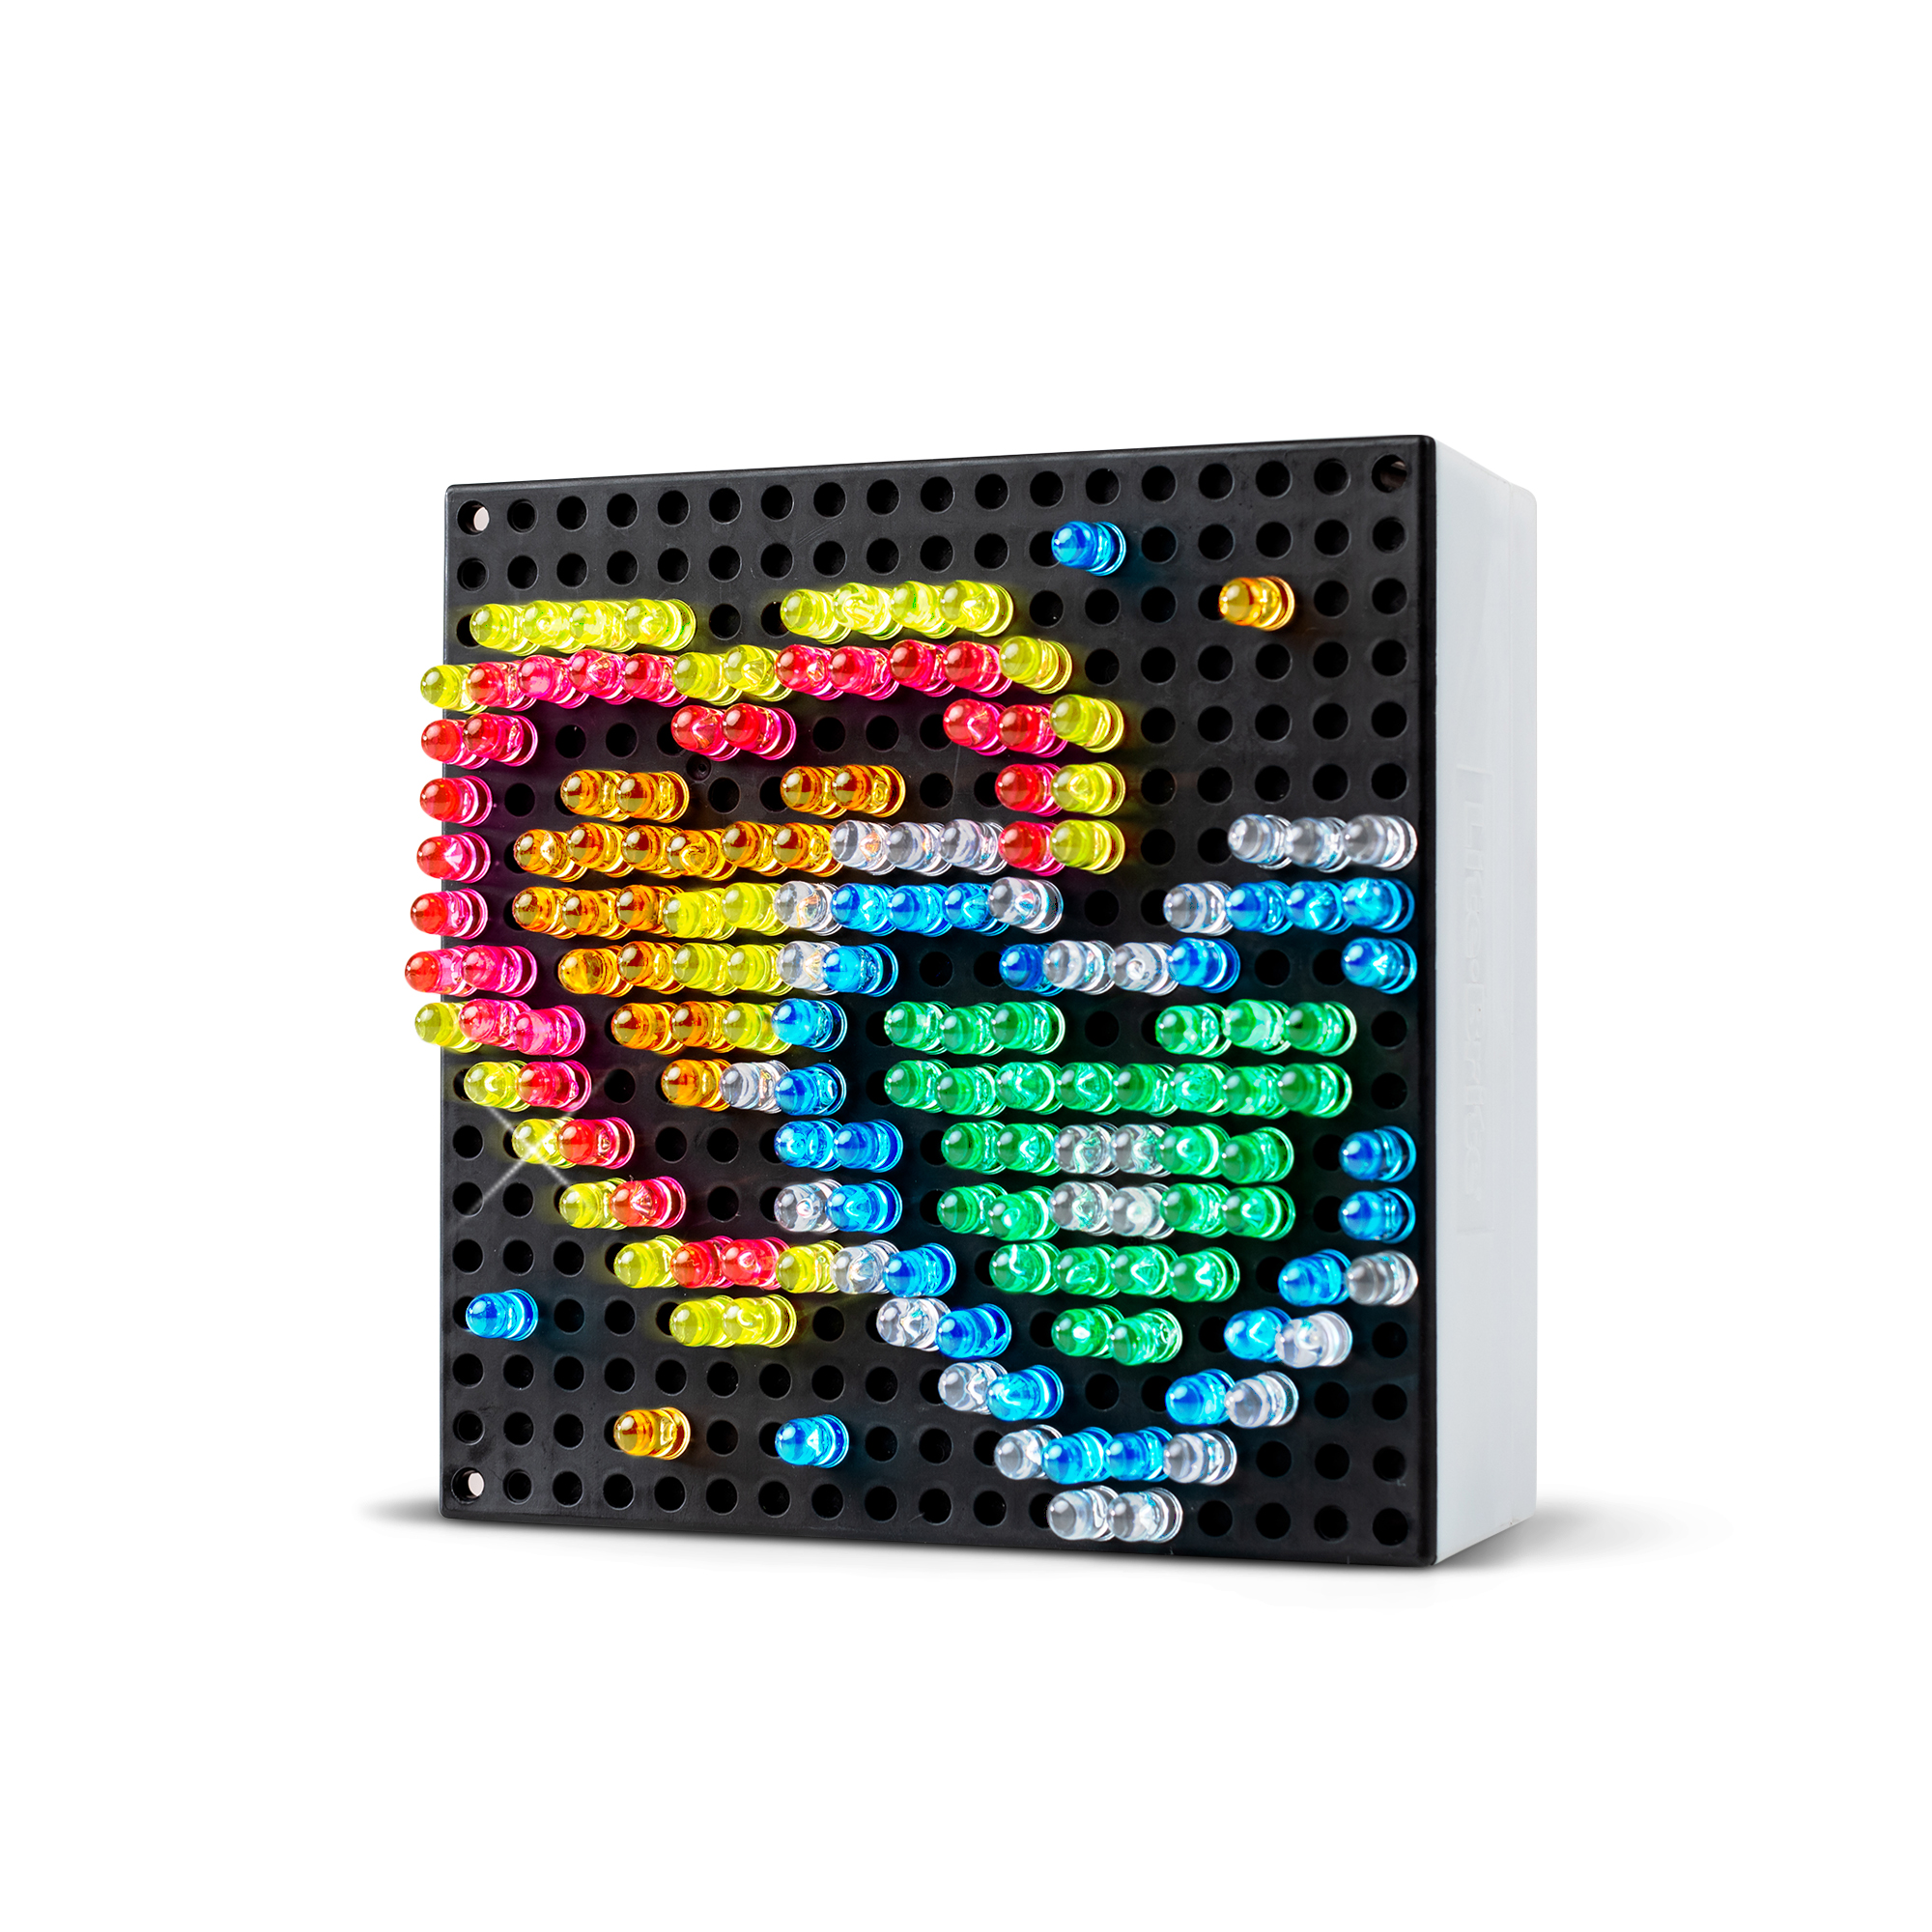  Lite-Brite Touch - Create, Play and Animate - Light Up